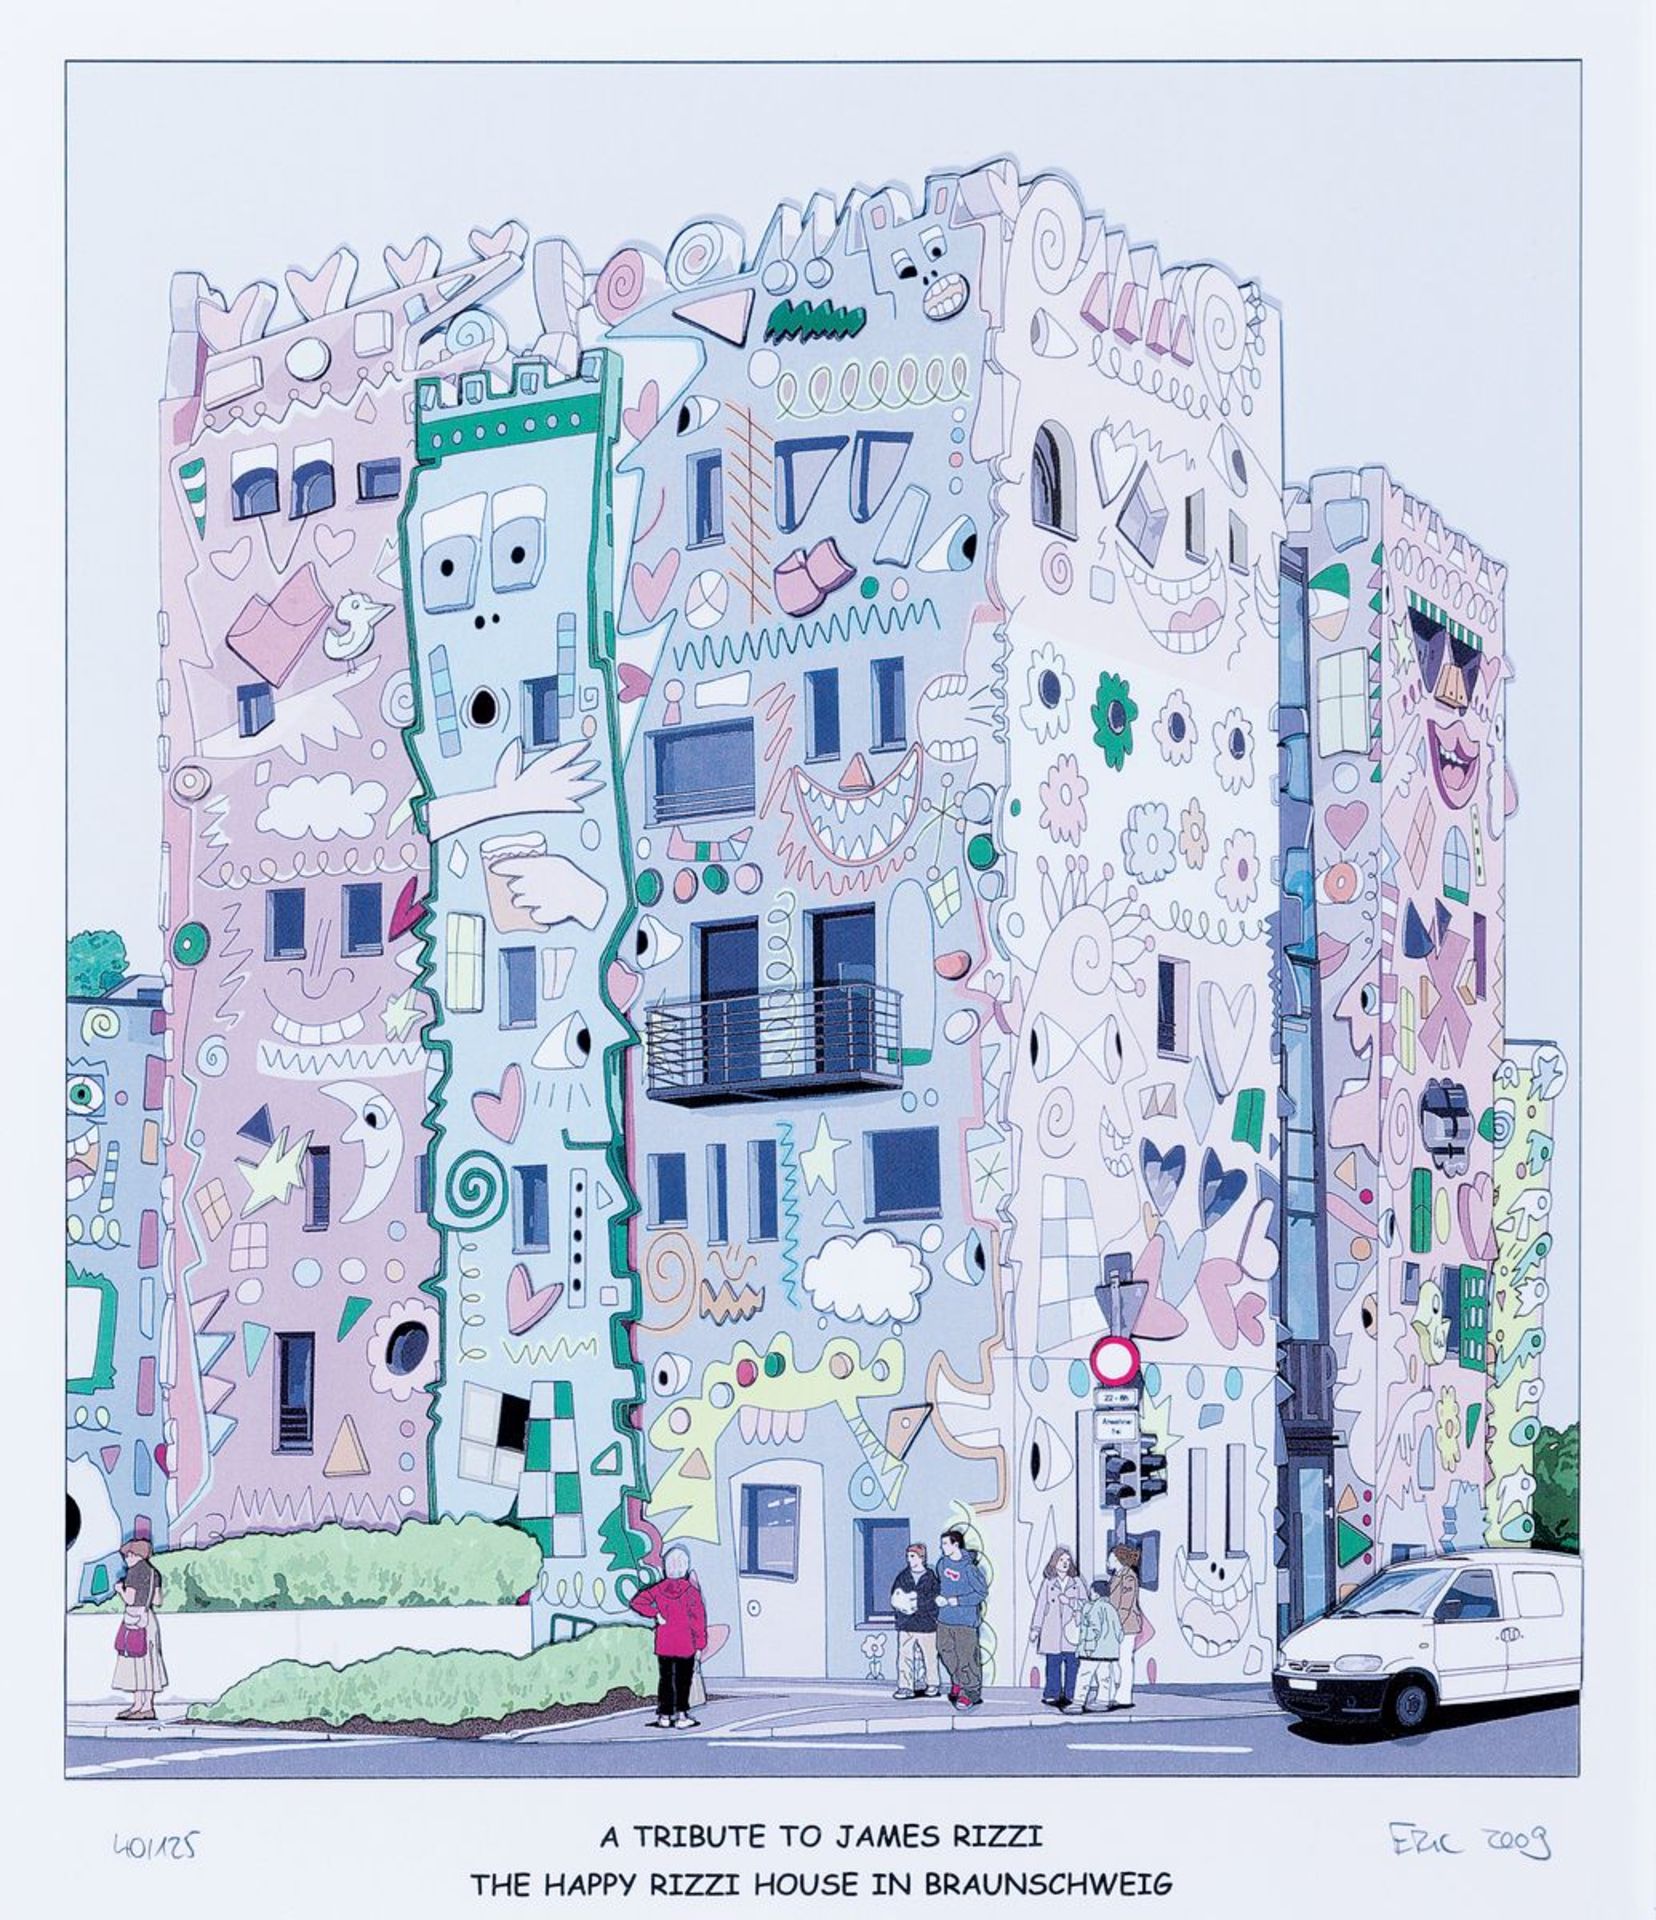 Eric Rob, 1954-2013, 'A tribute to James Rizzi',